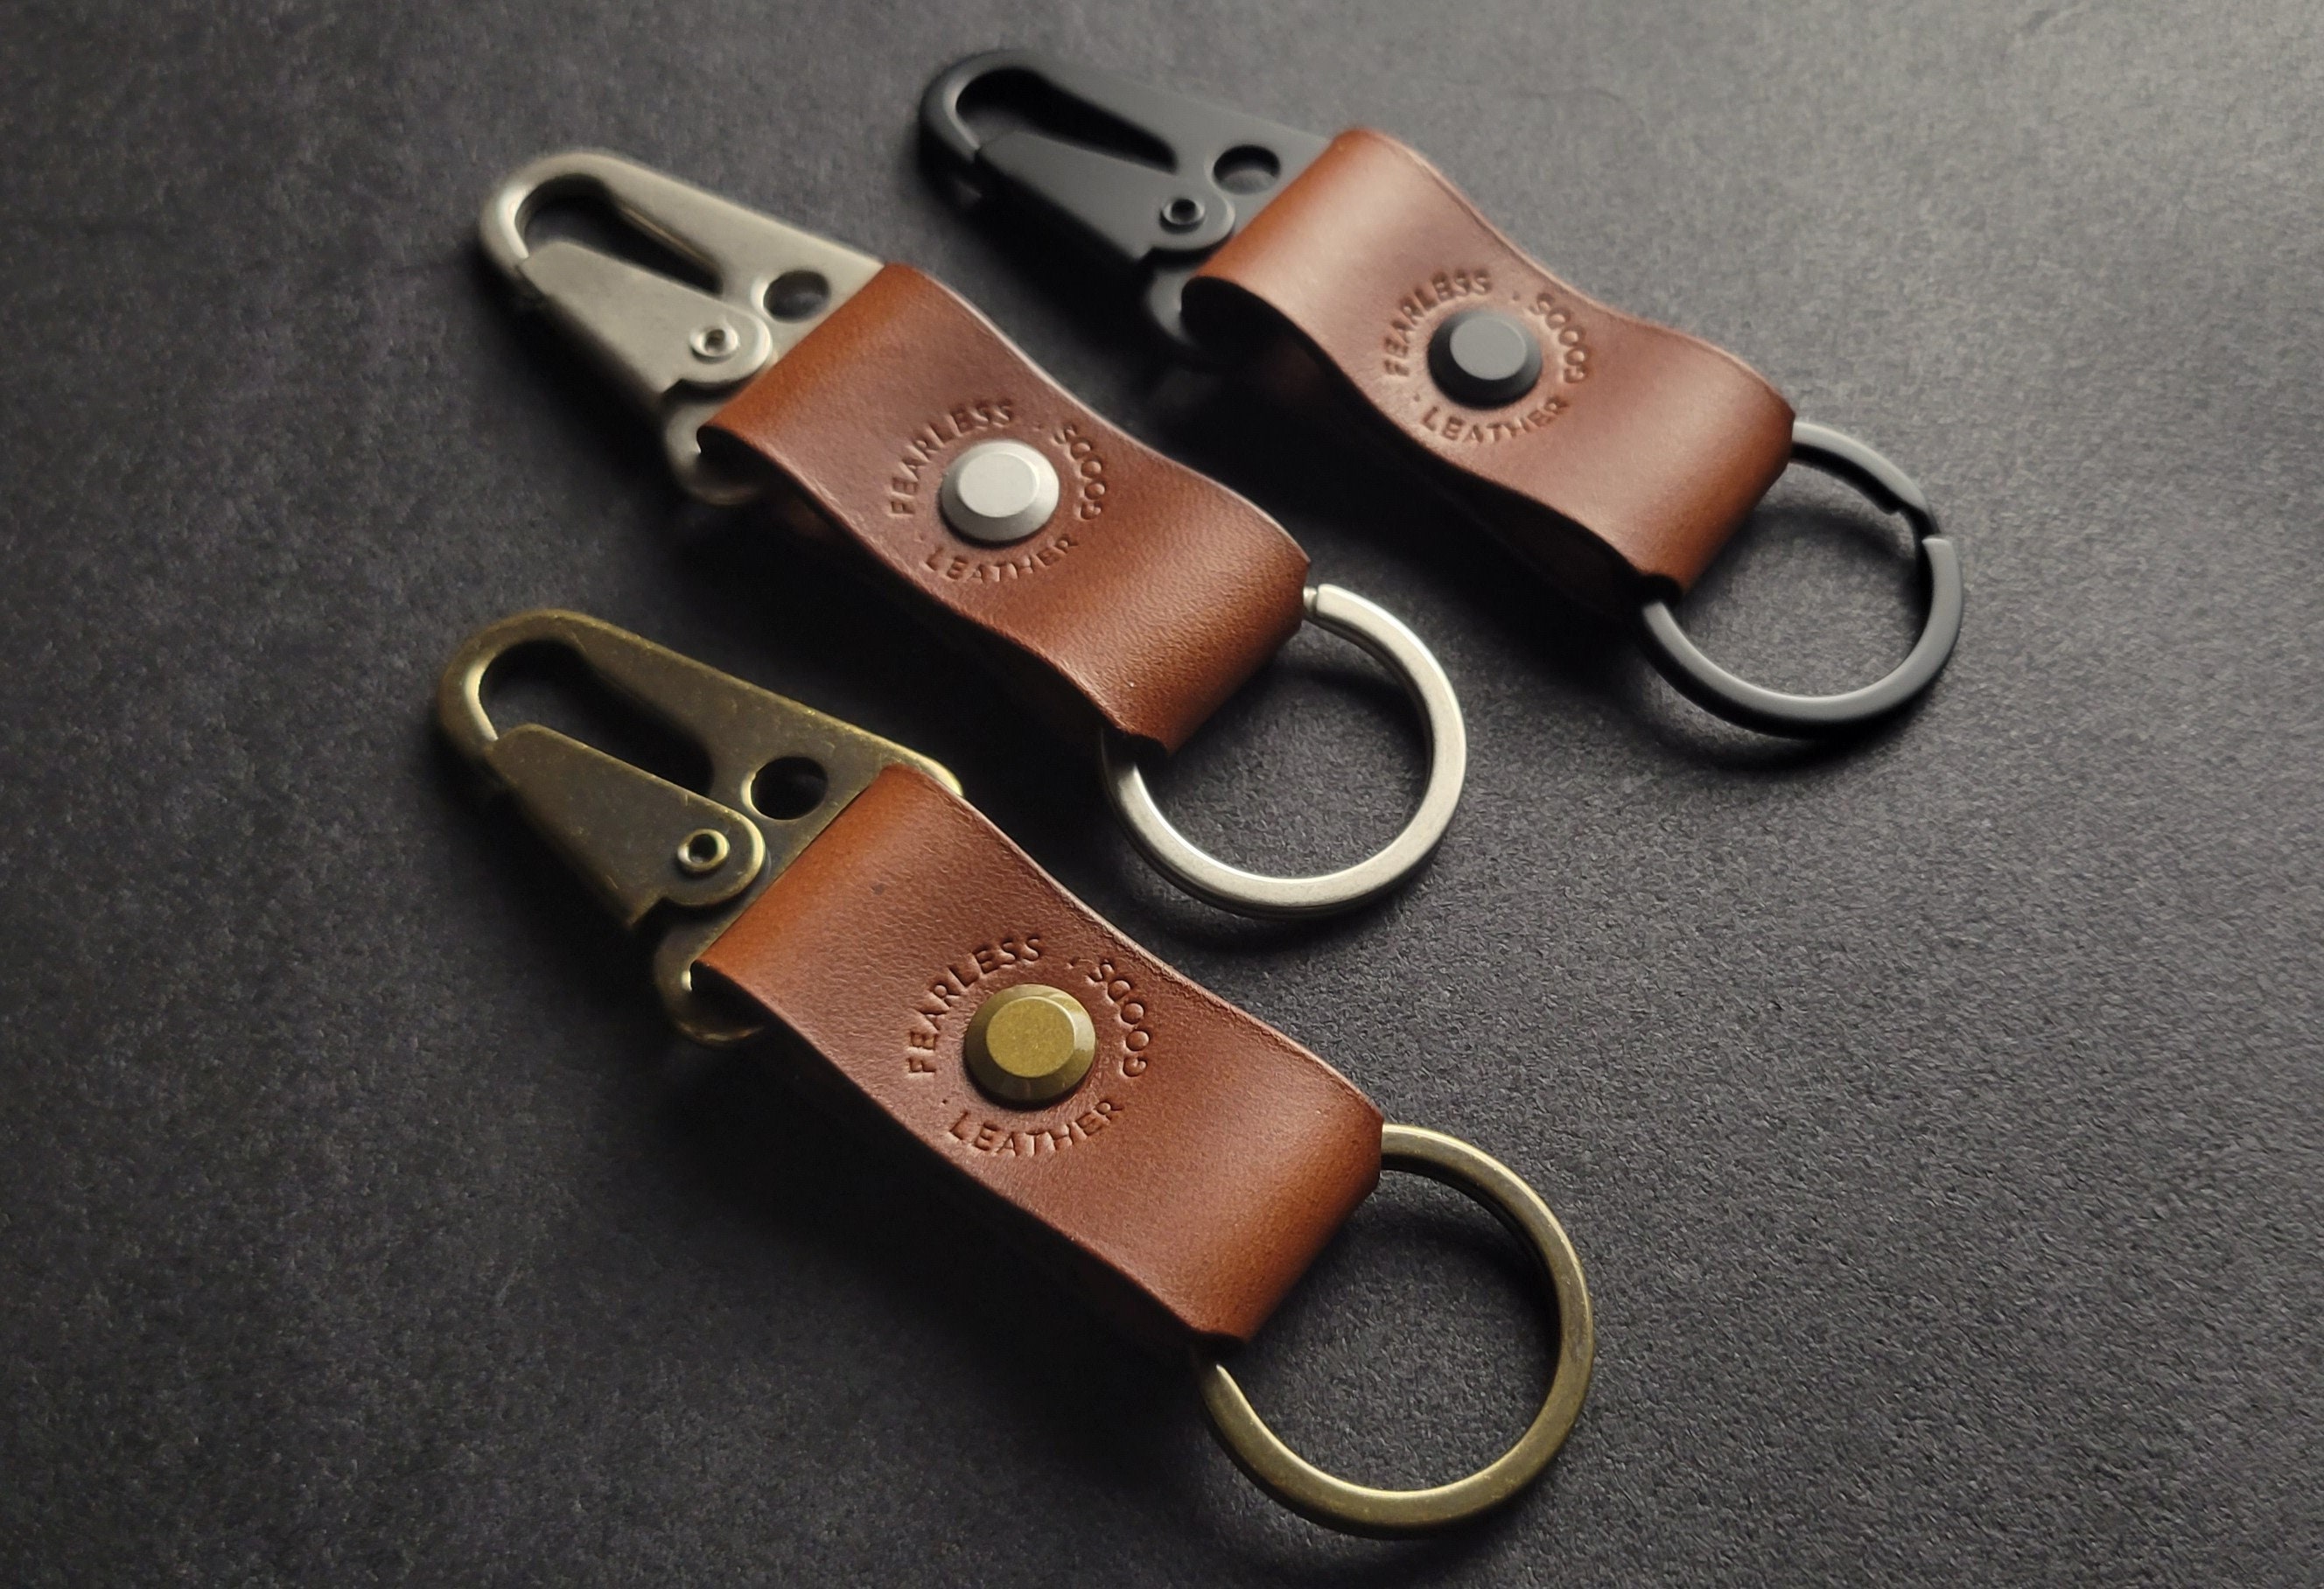 Exquisite Handmade Leather Leather Keychain With Gold Plating